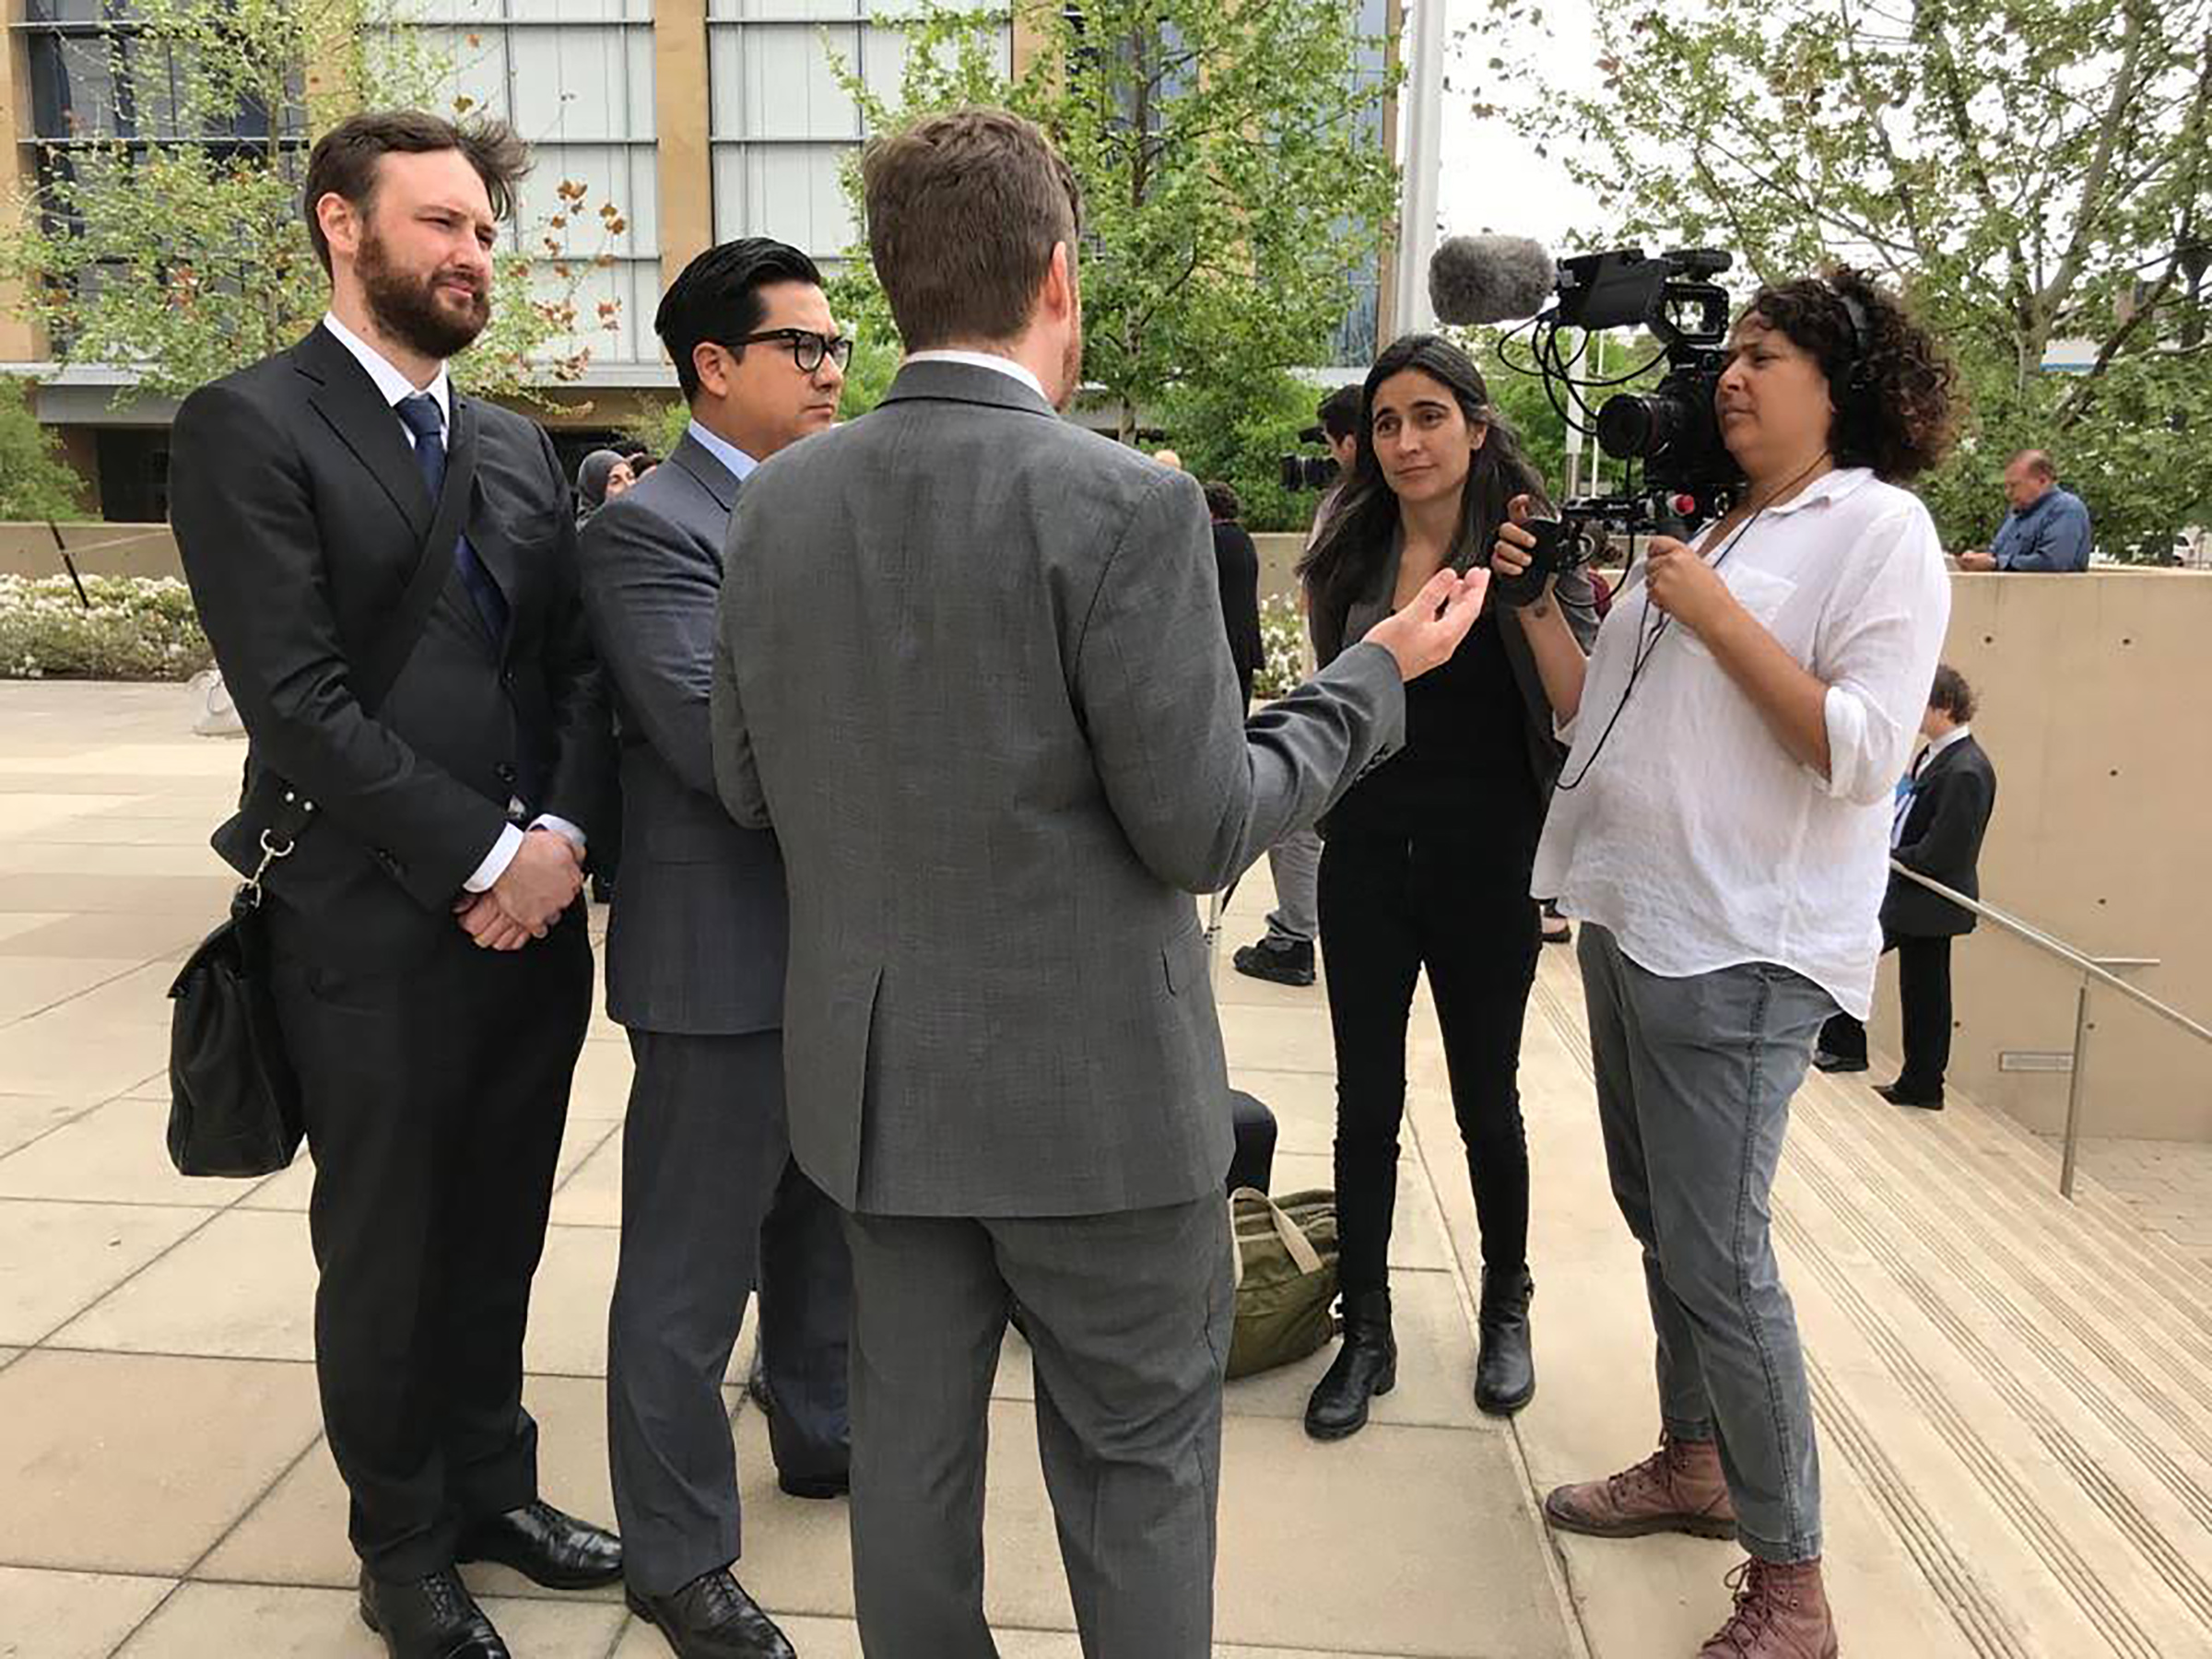 Julia Bacha and cinematographer Amber Fares interviewing ACLU lawyers outside the courtroom in Austin, Texas (Courtesy Just Vision)